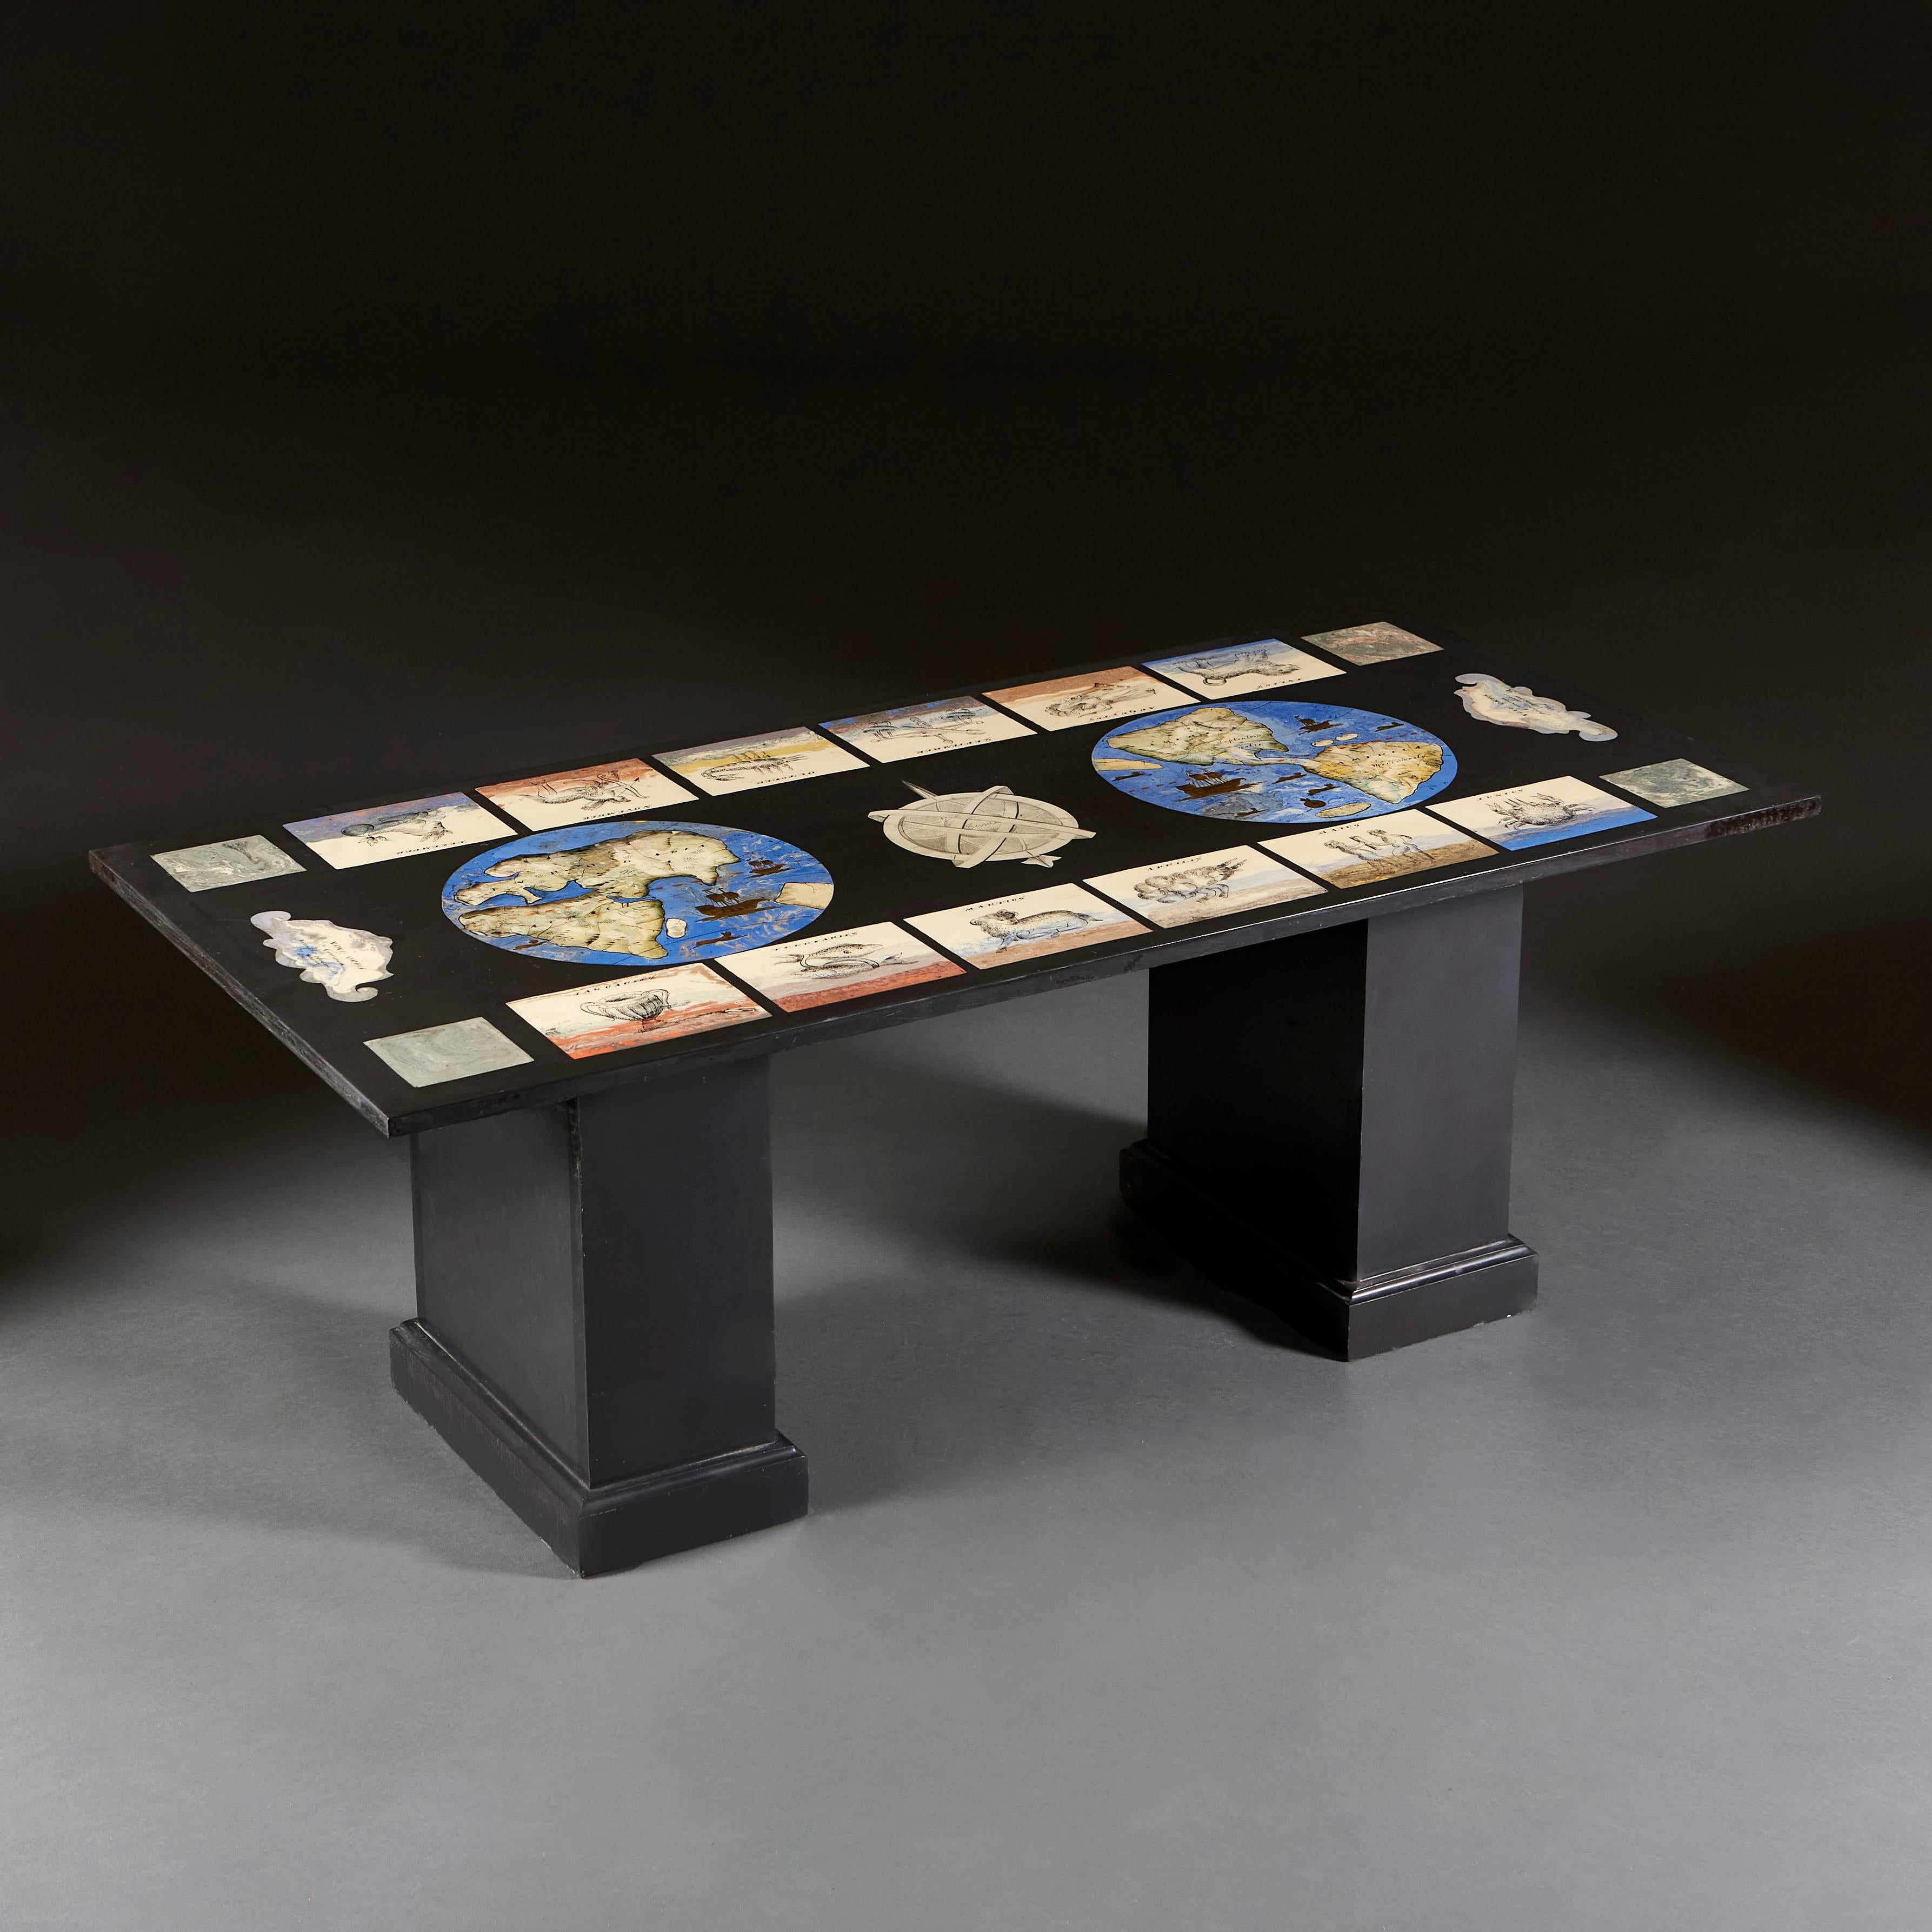 An unusual scagliola coffee table, the top with the signs of the Zodiac, and world maps on a charcoal ground, resting on two plinth bases.